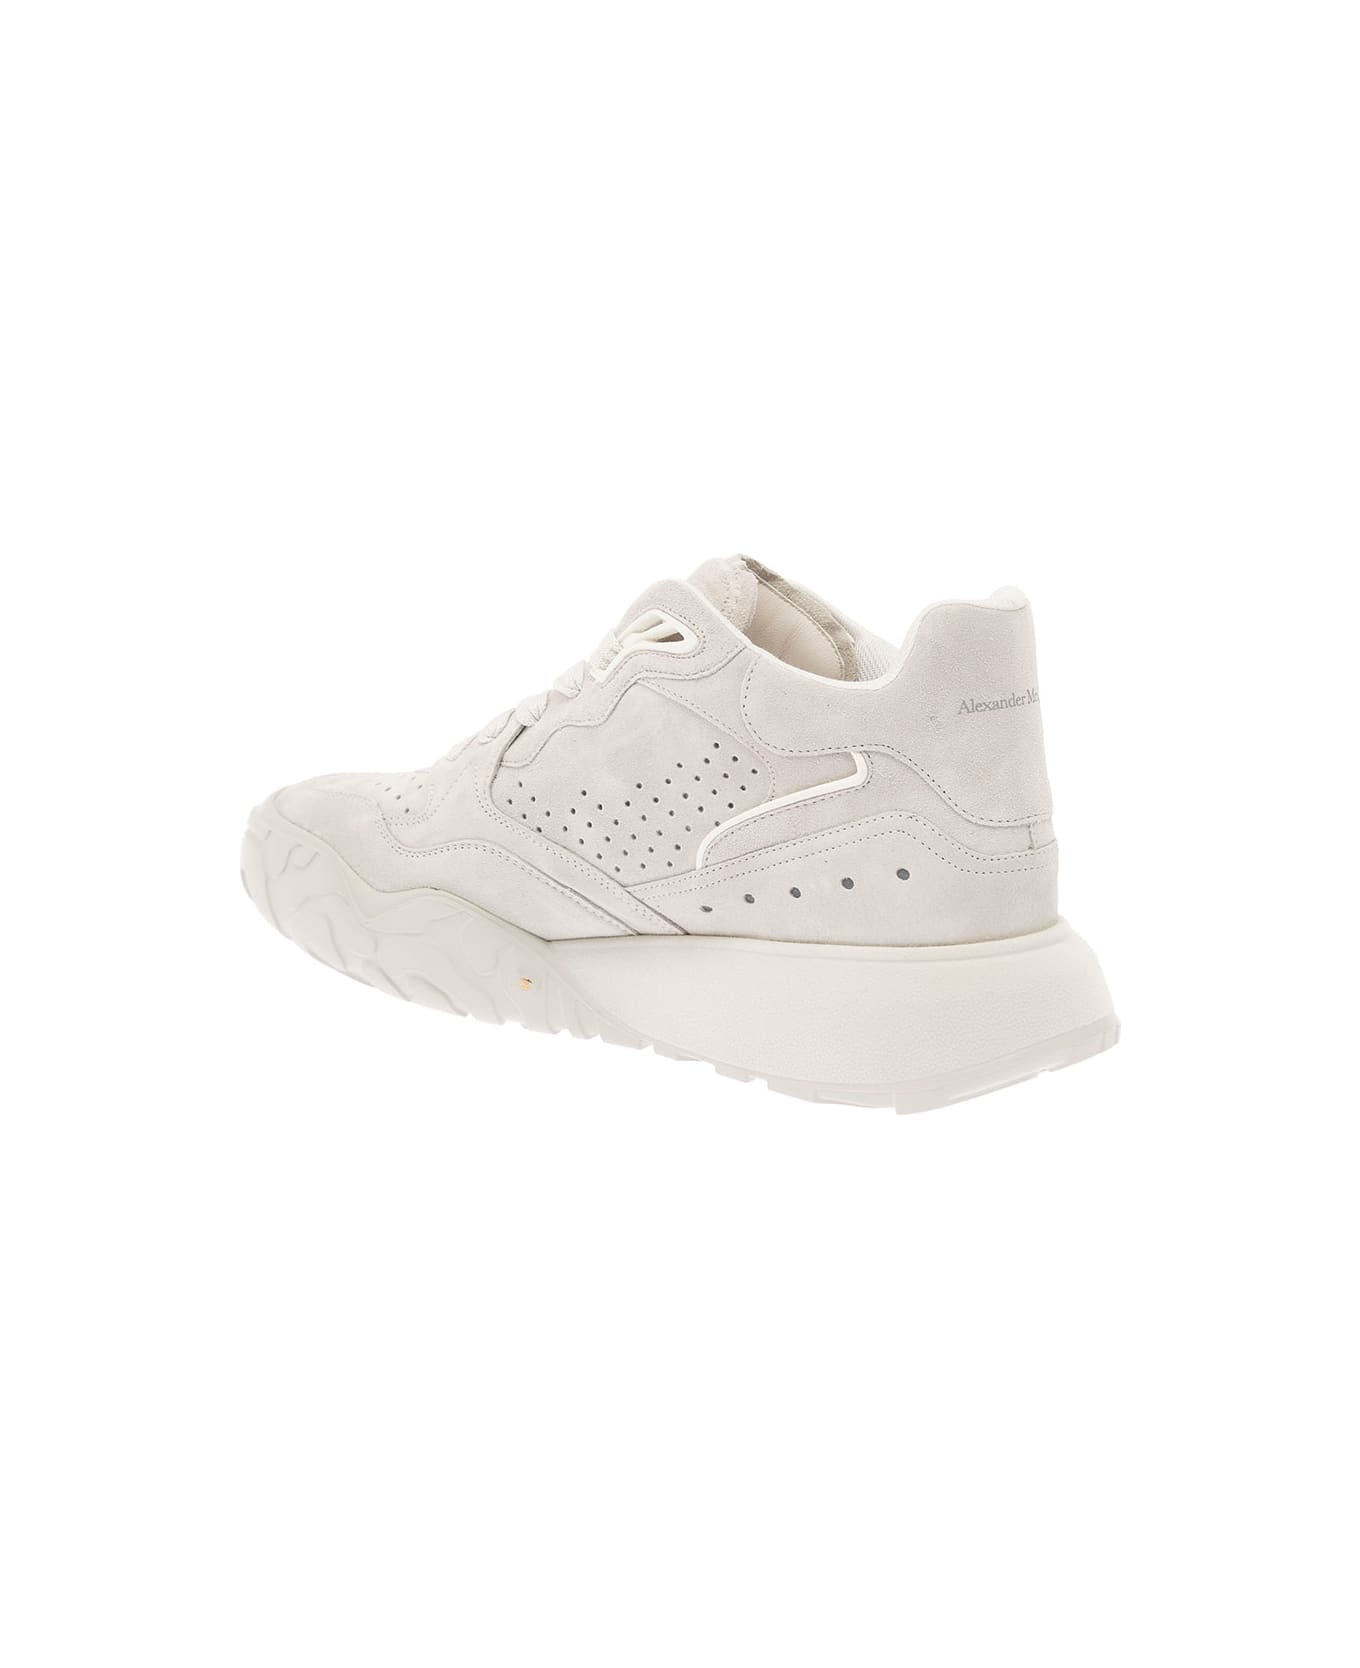 Alexander McQueen Man's White Suede Leather Sneakers - White